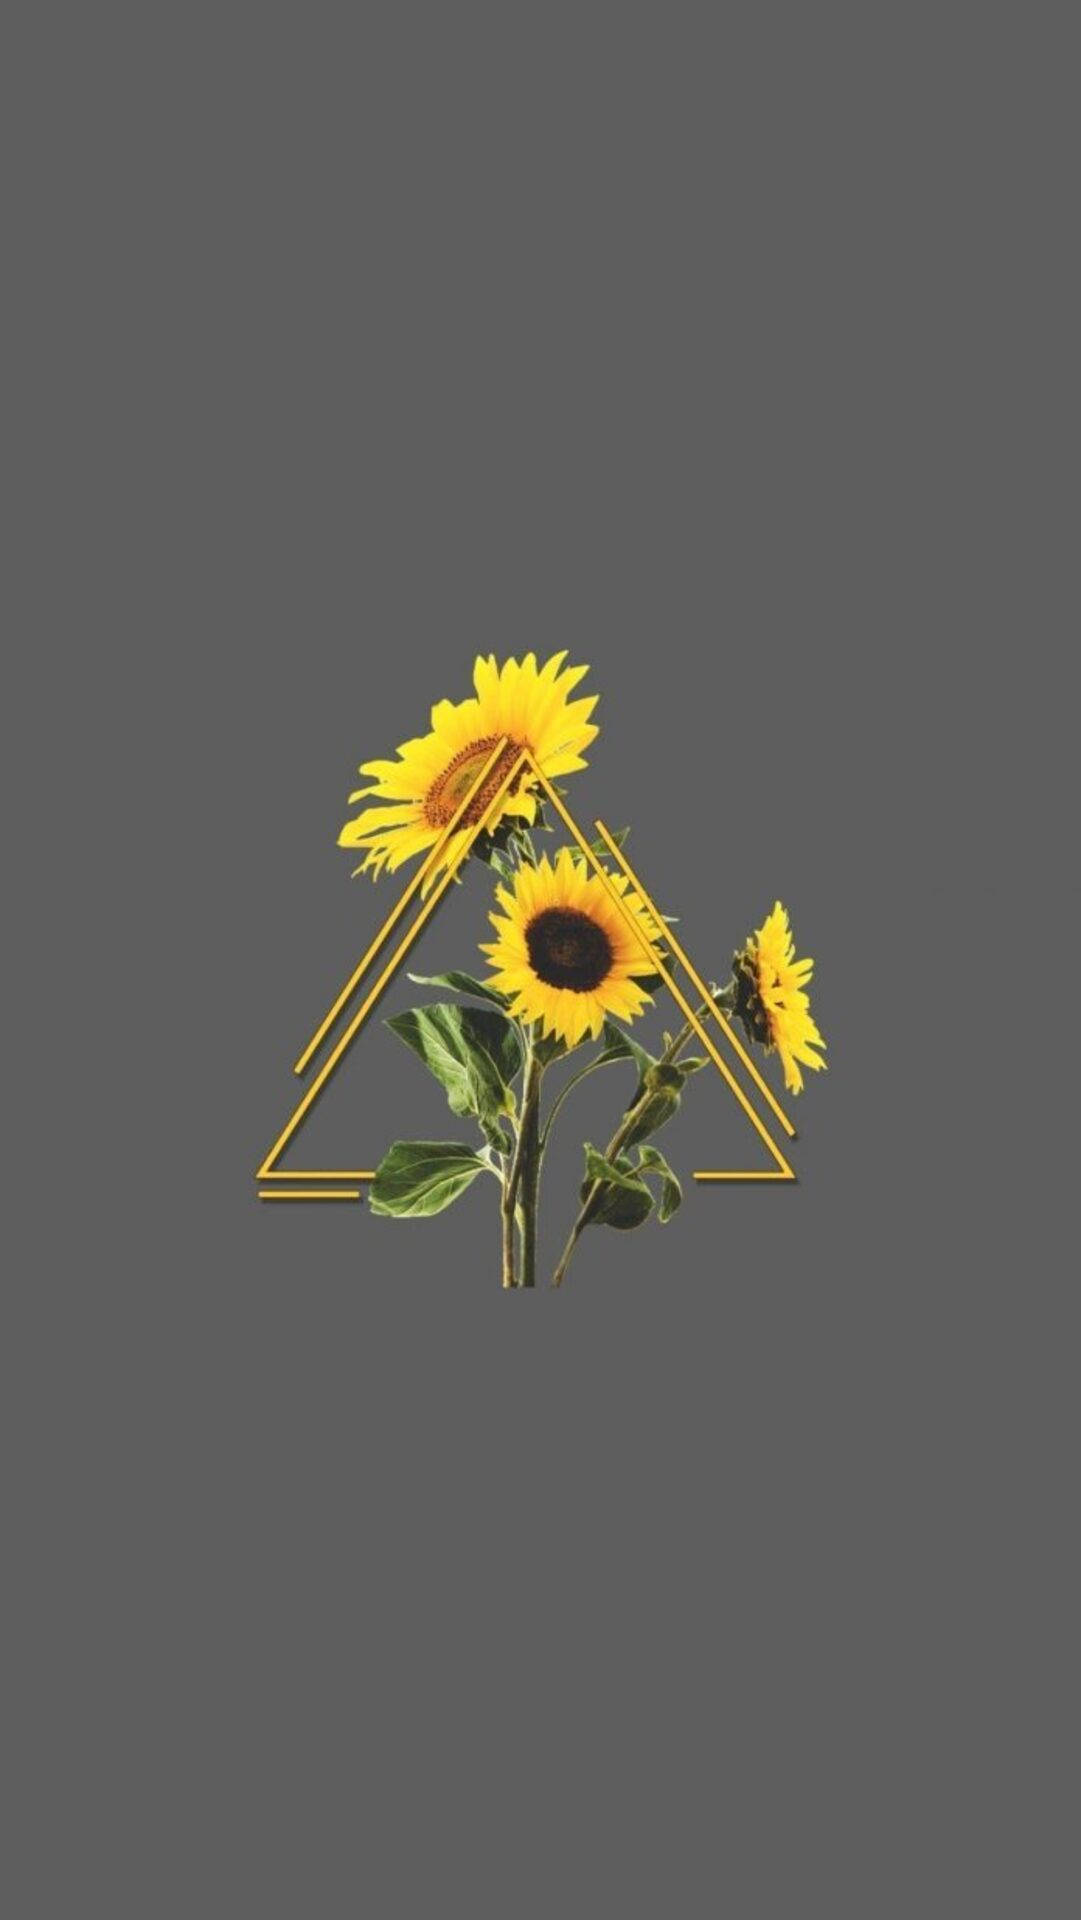 Cool Sunflower Iphone Edit Background